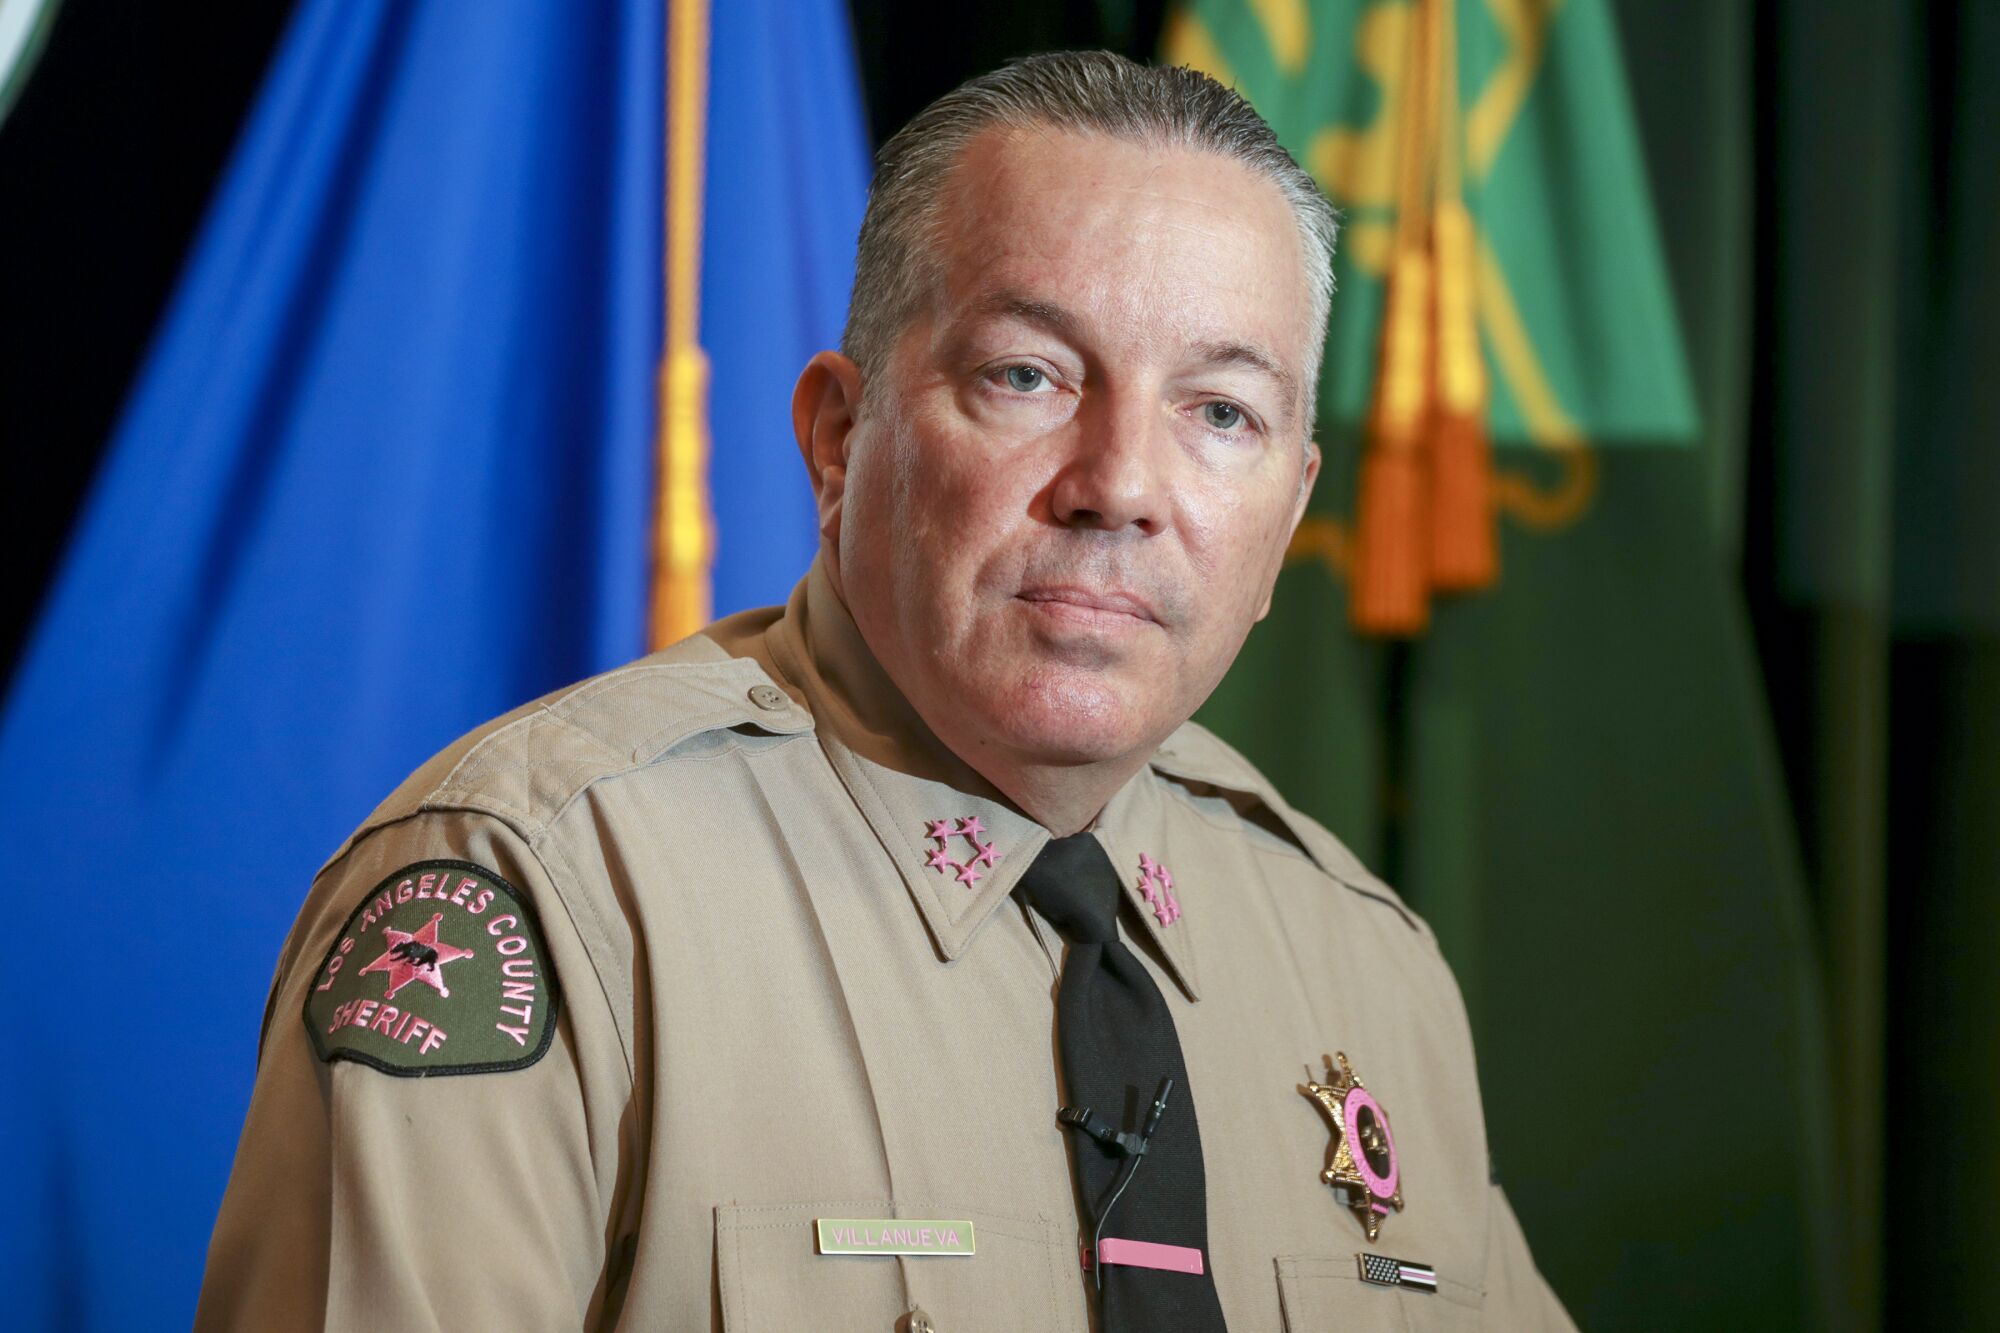 L.A. County Sheriff Alex Villanueva with flags in background